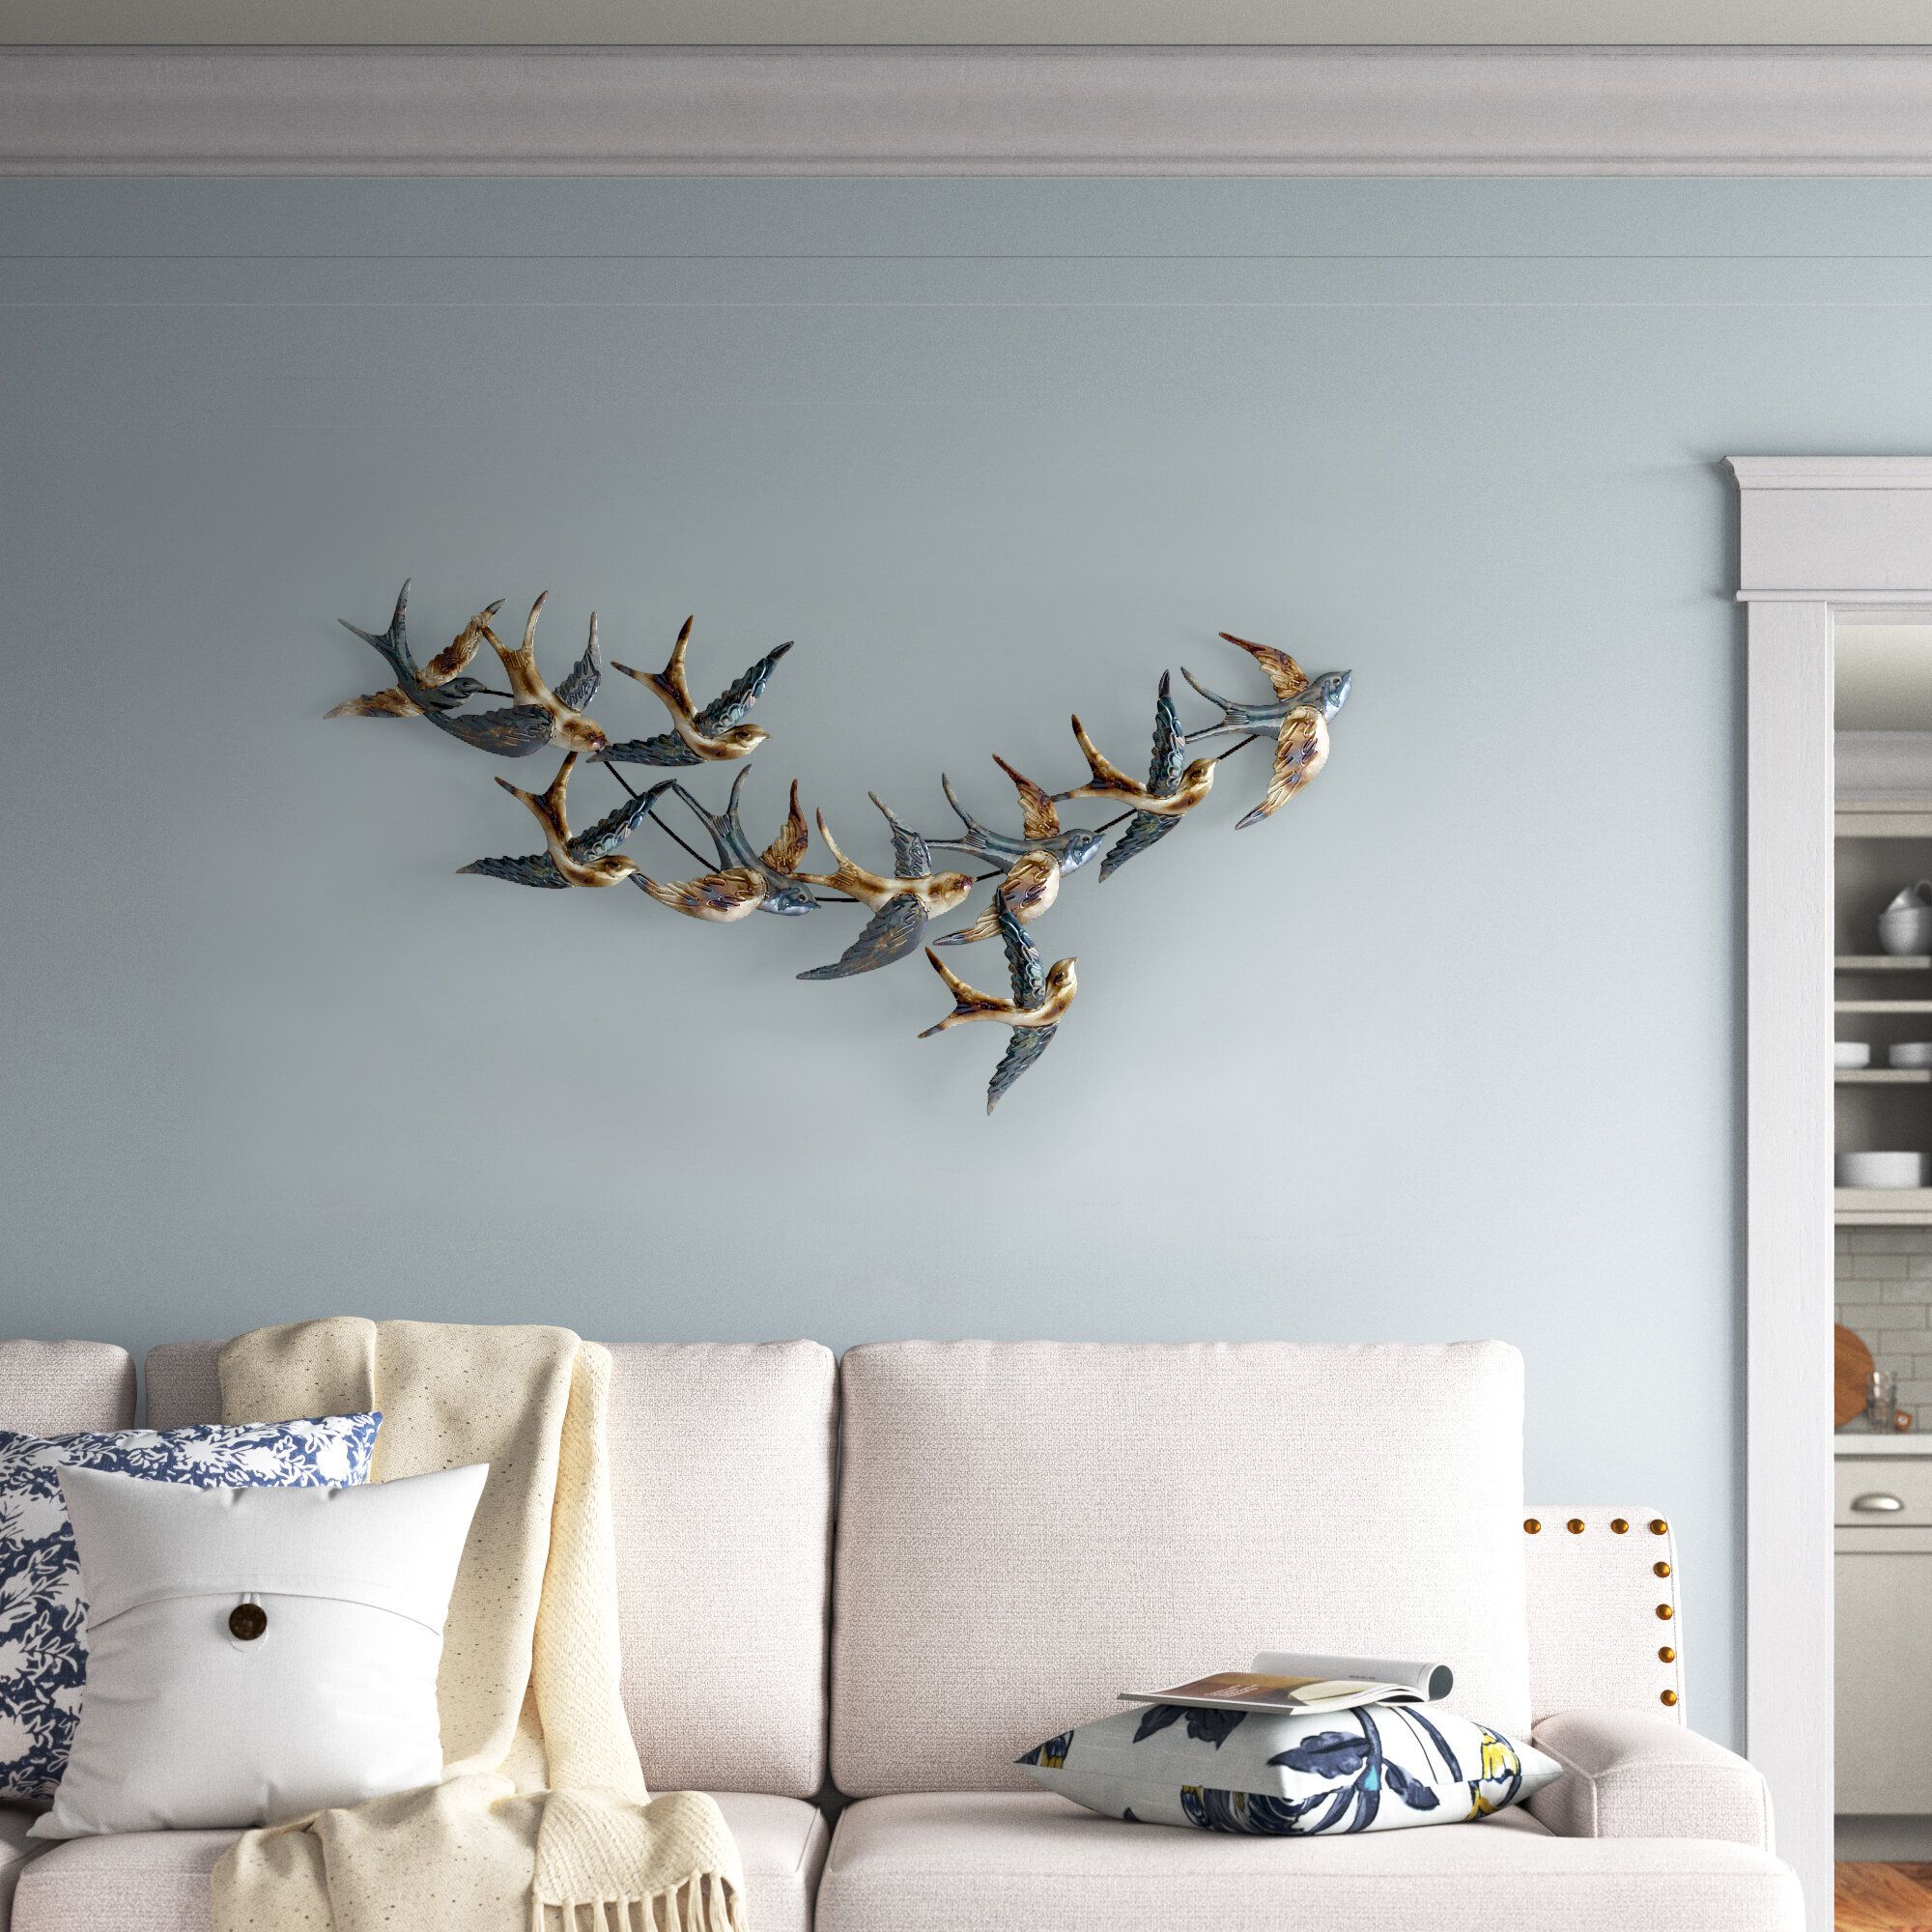 Red Barrel Studio® Wall Decor Metal & Reviews – Wayfair Canada Intended For Most Current Metal Bird Wall Sculpture Wall Art (Gallery 12 of 20)